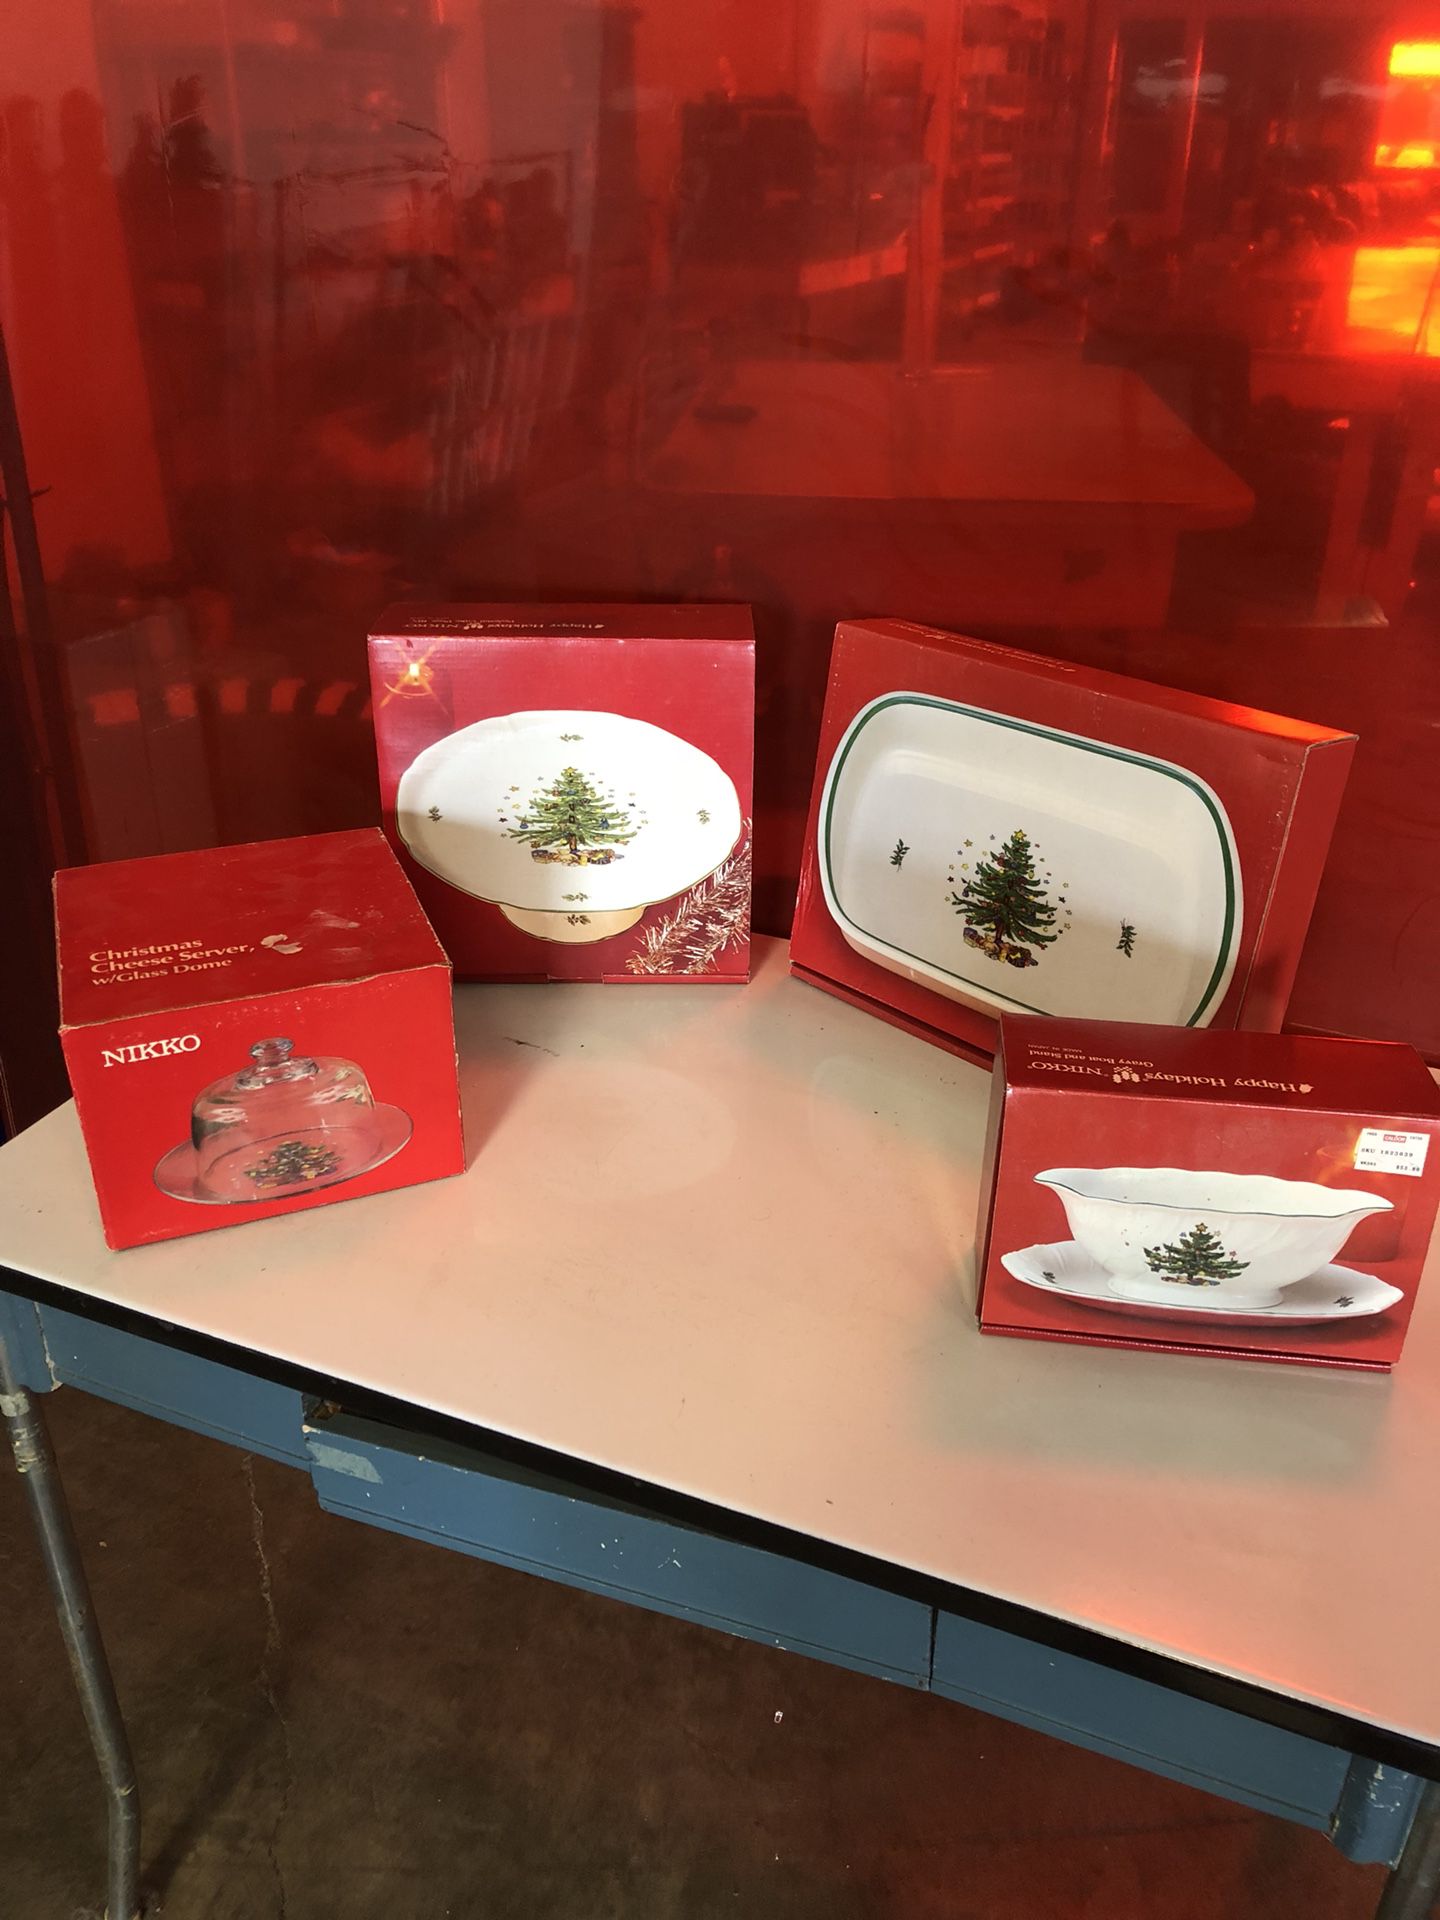 Nikko Christmastime set includes place settings, platters, cheese platter, pedestal cake plate, vegetable bowl. $200 for lot